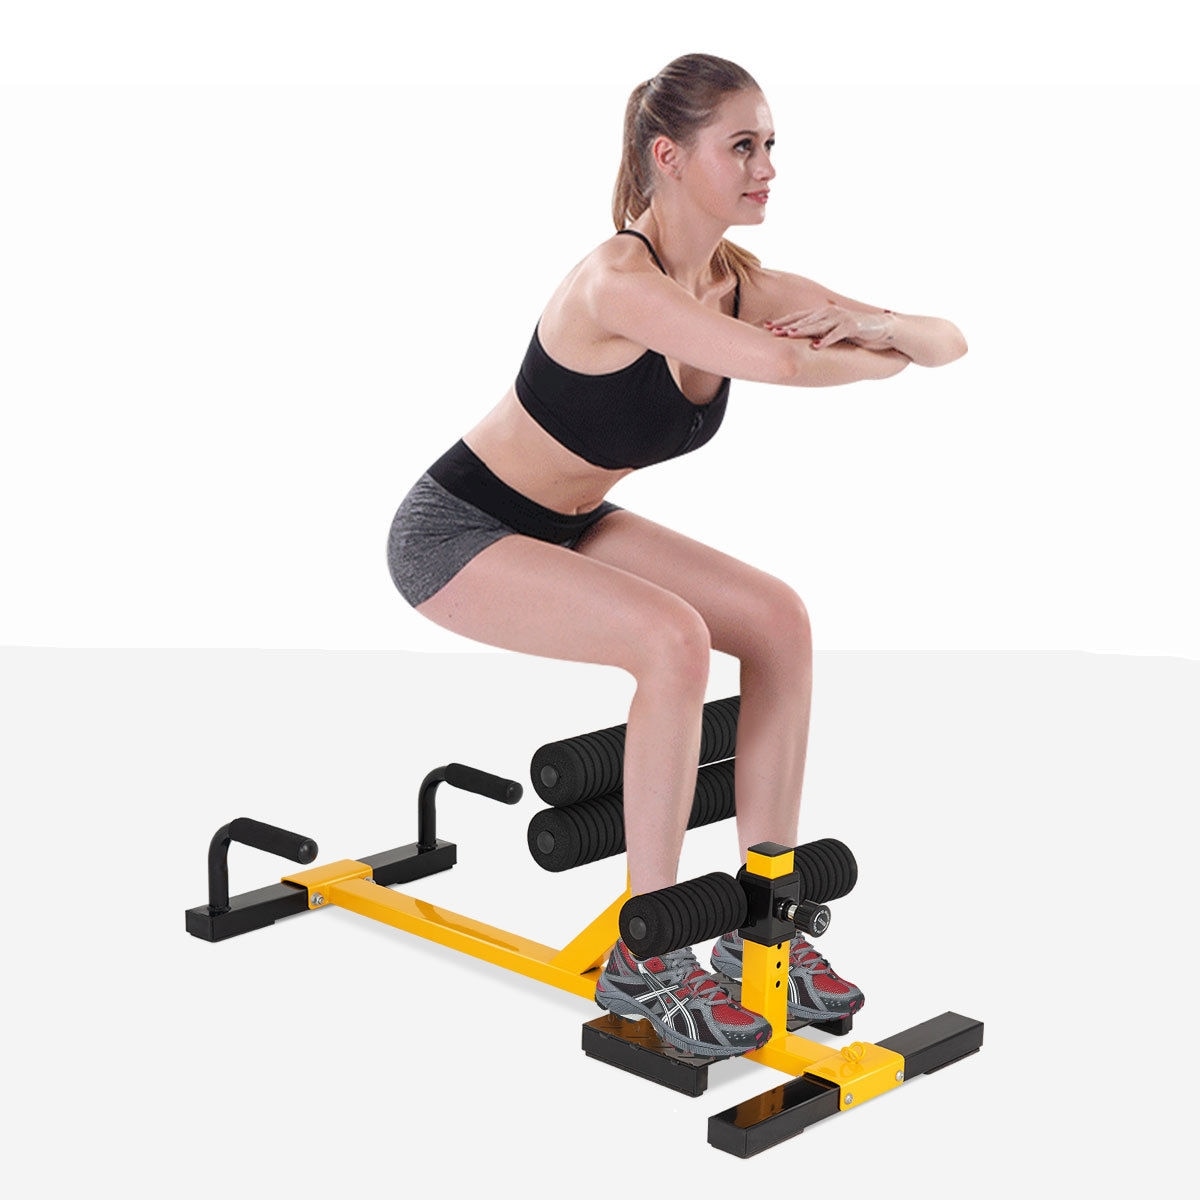 Sissy Squat 3 In 1 Abs Squat Home Workout Machine High Quality Iron 